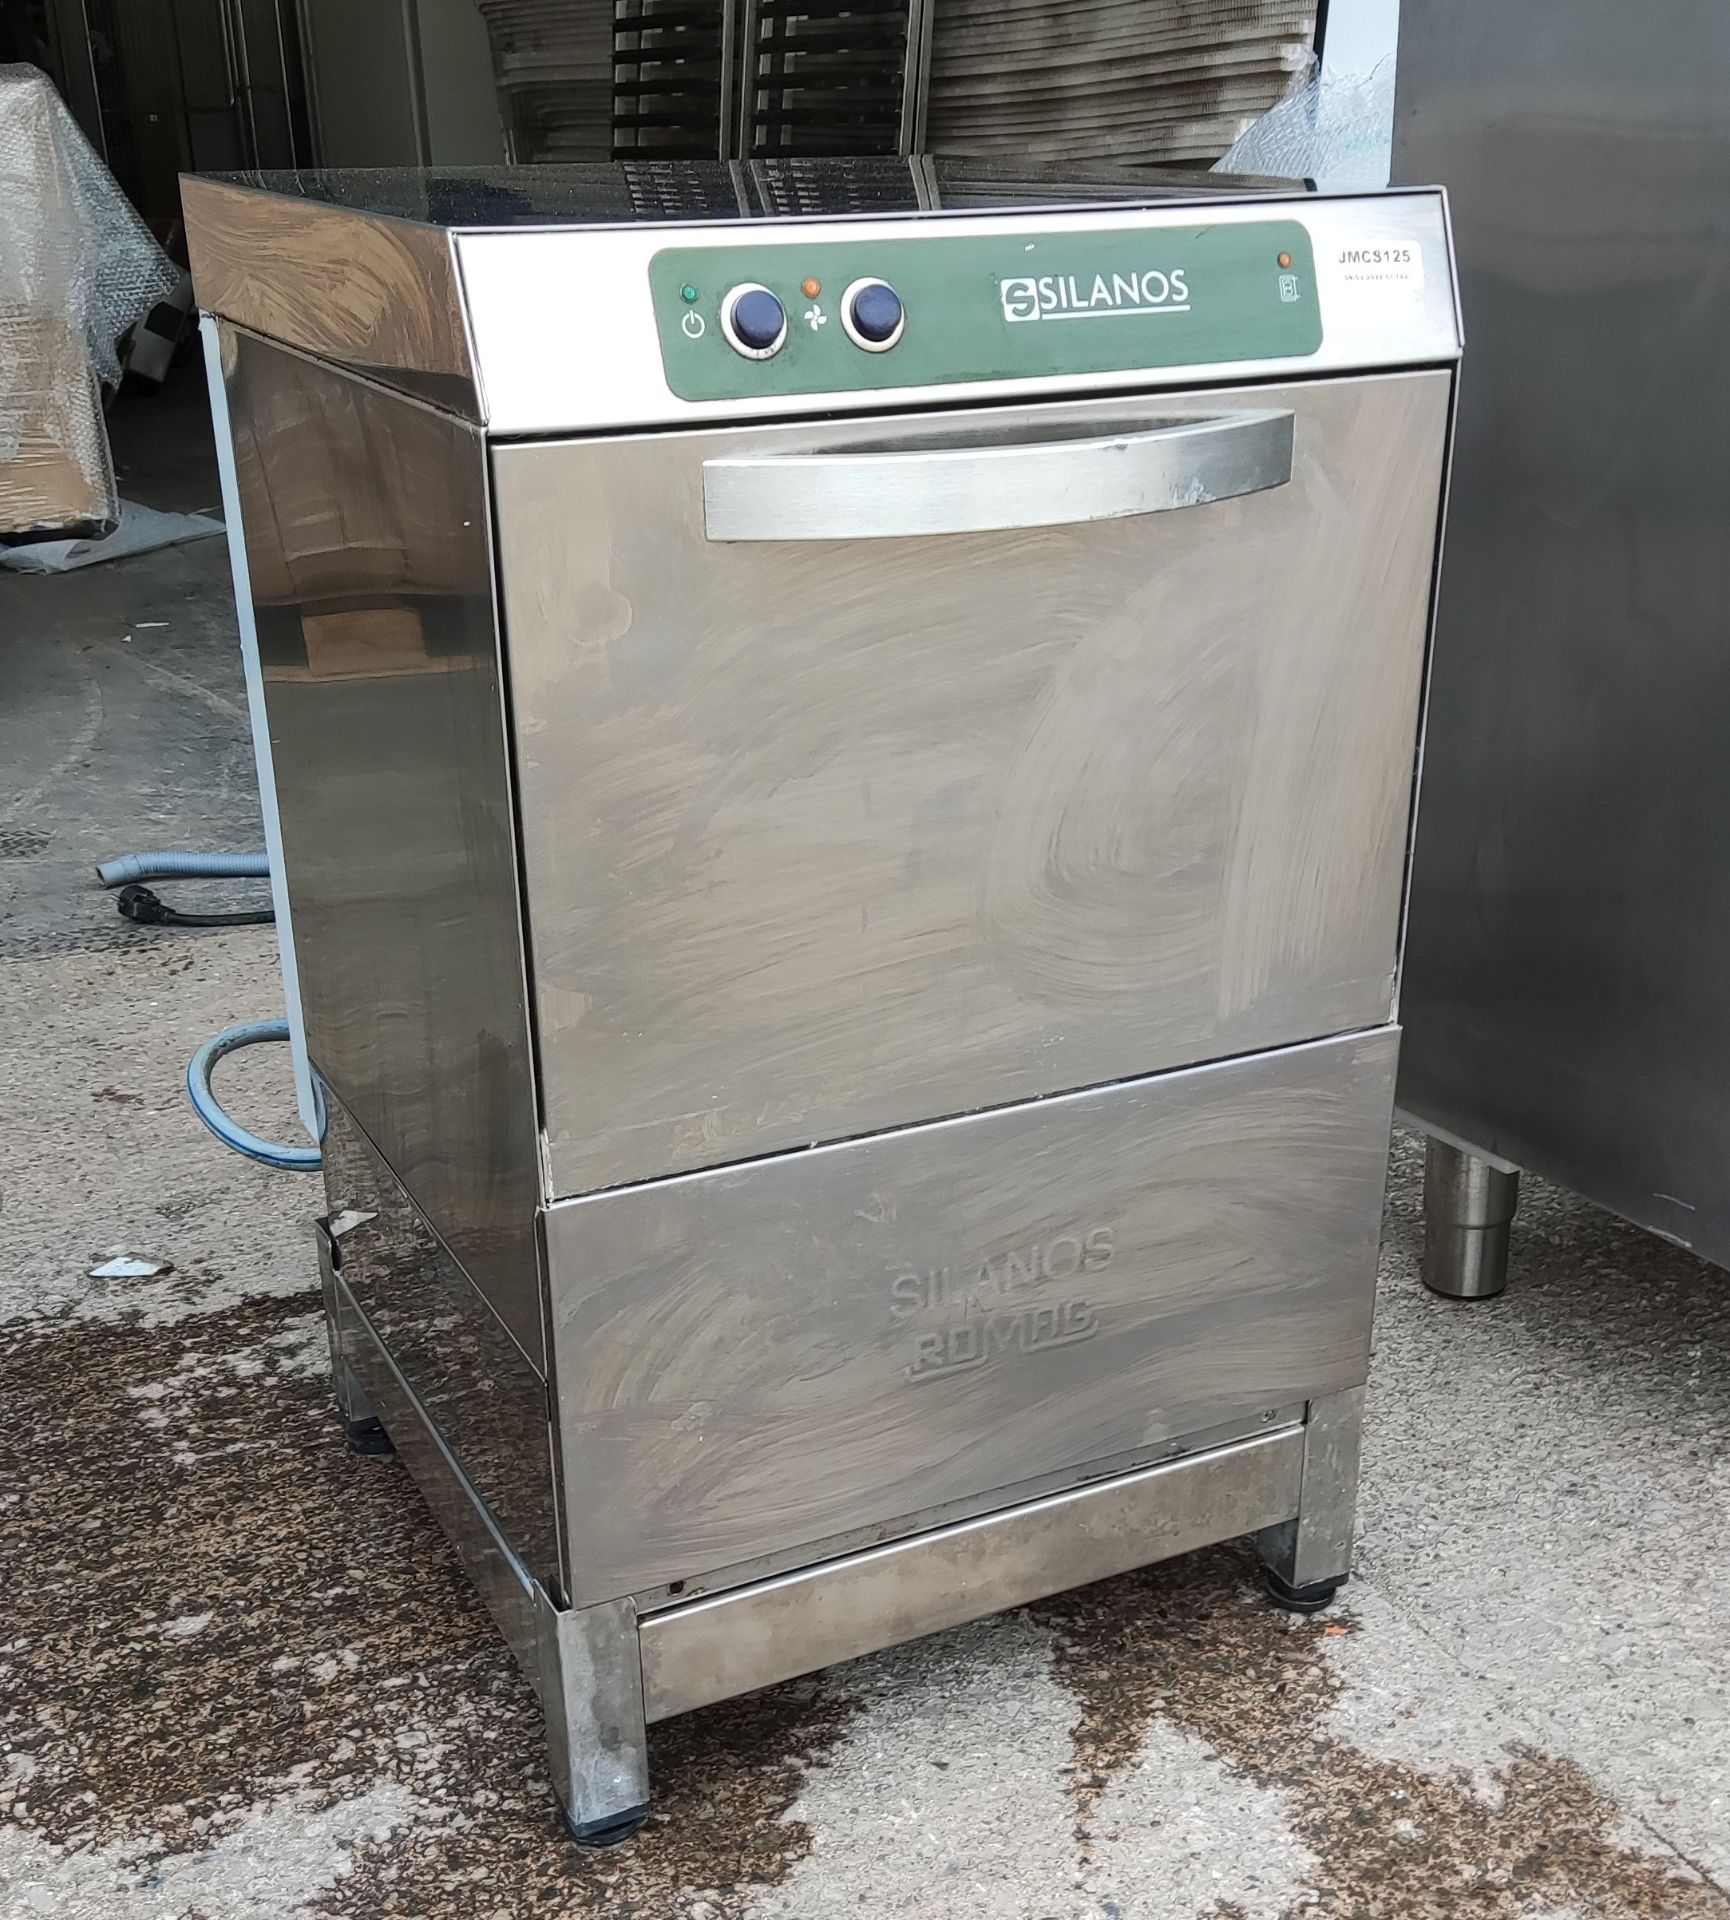 1 x Silanos E40 ECO Undercounter Glass Washer with Low Stand - JMCS125 - CL723 - Location: Altrincha